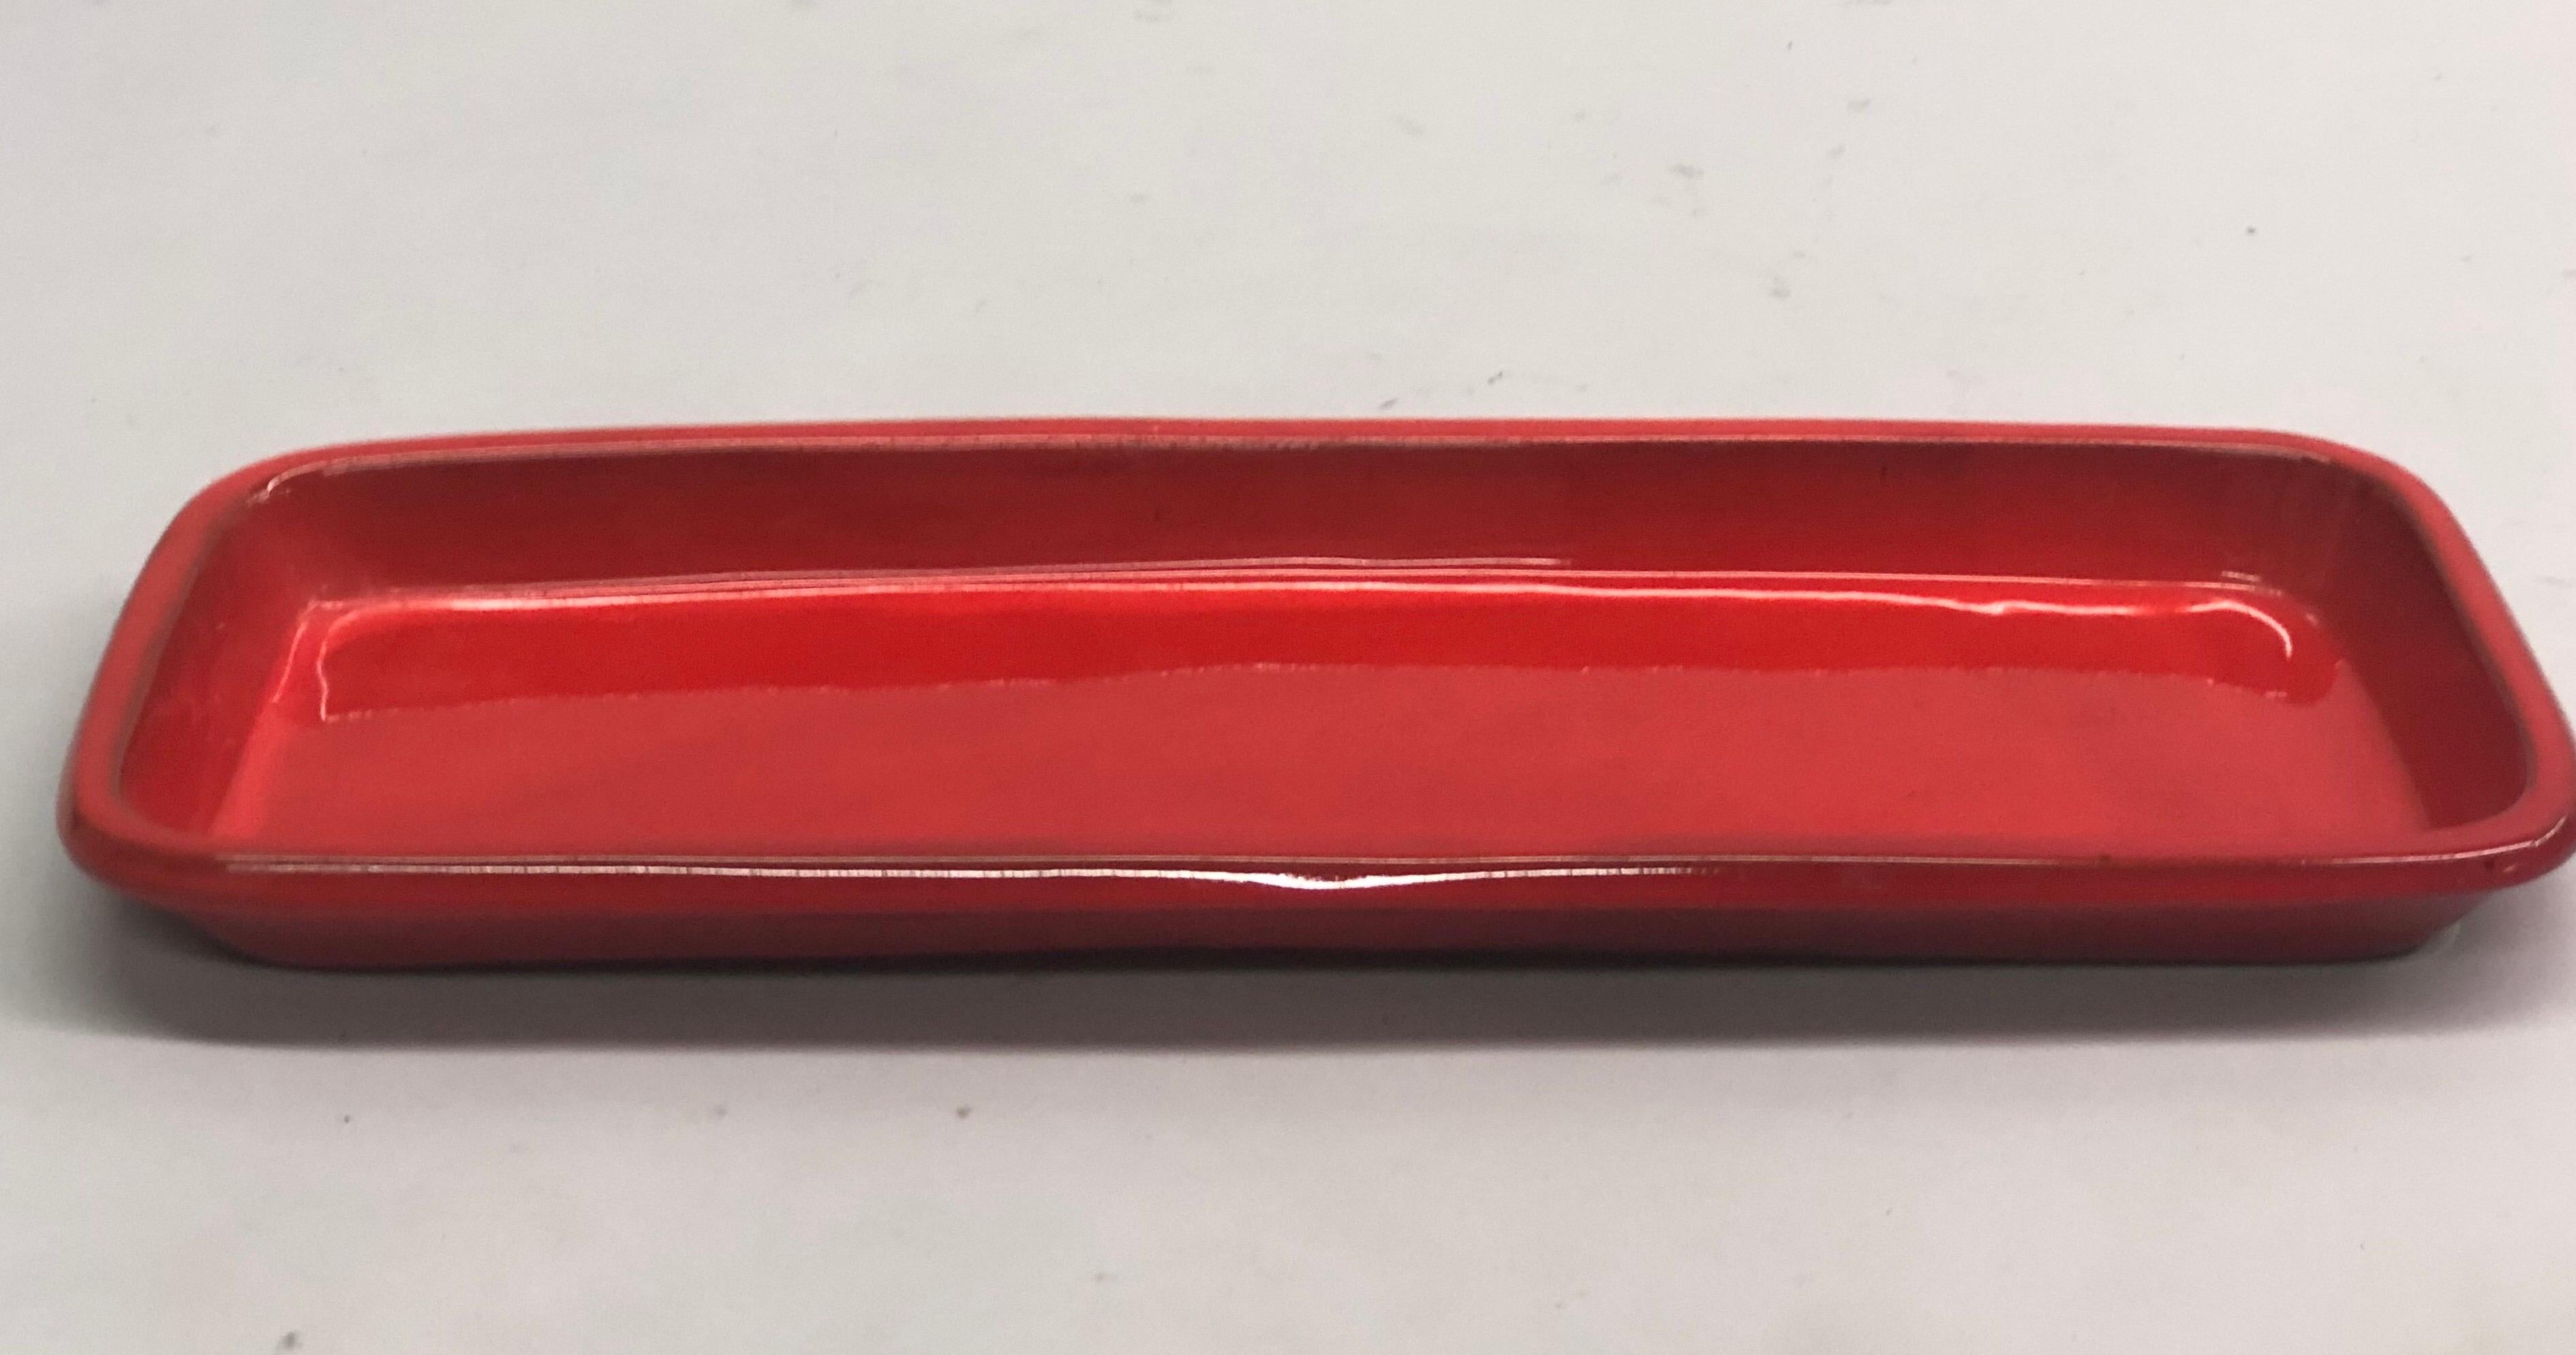 Very large French Mid-Century Modern rectangular, red ceramic serving platter or tray handmade by Voltz, Vallauris. Signed on reverse, Voltz, Vallauris, France.

A large oval red ceramic platter by Voltz is also available at additional cost. See